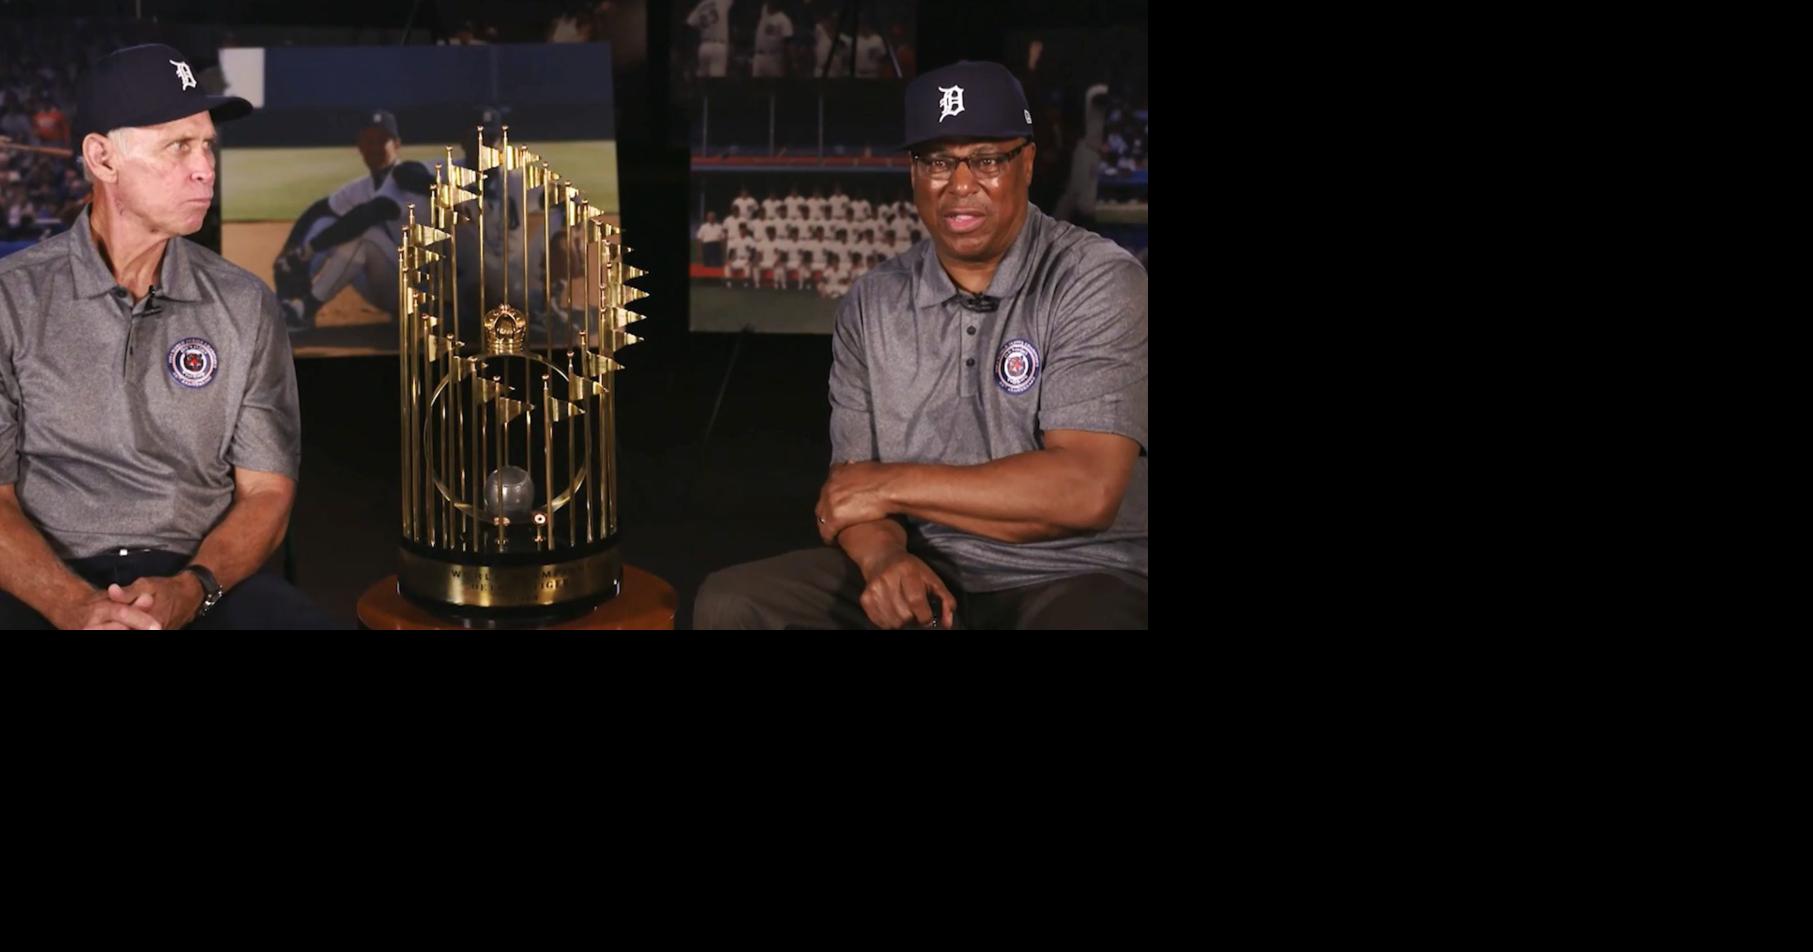 Lou Whitaker: Top 10 Most Expensive Baseball Cards Sold on